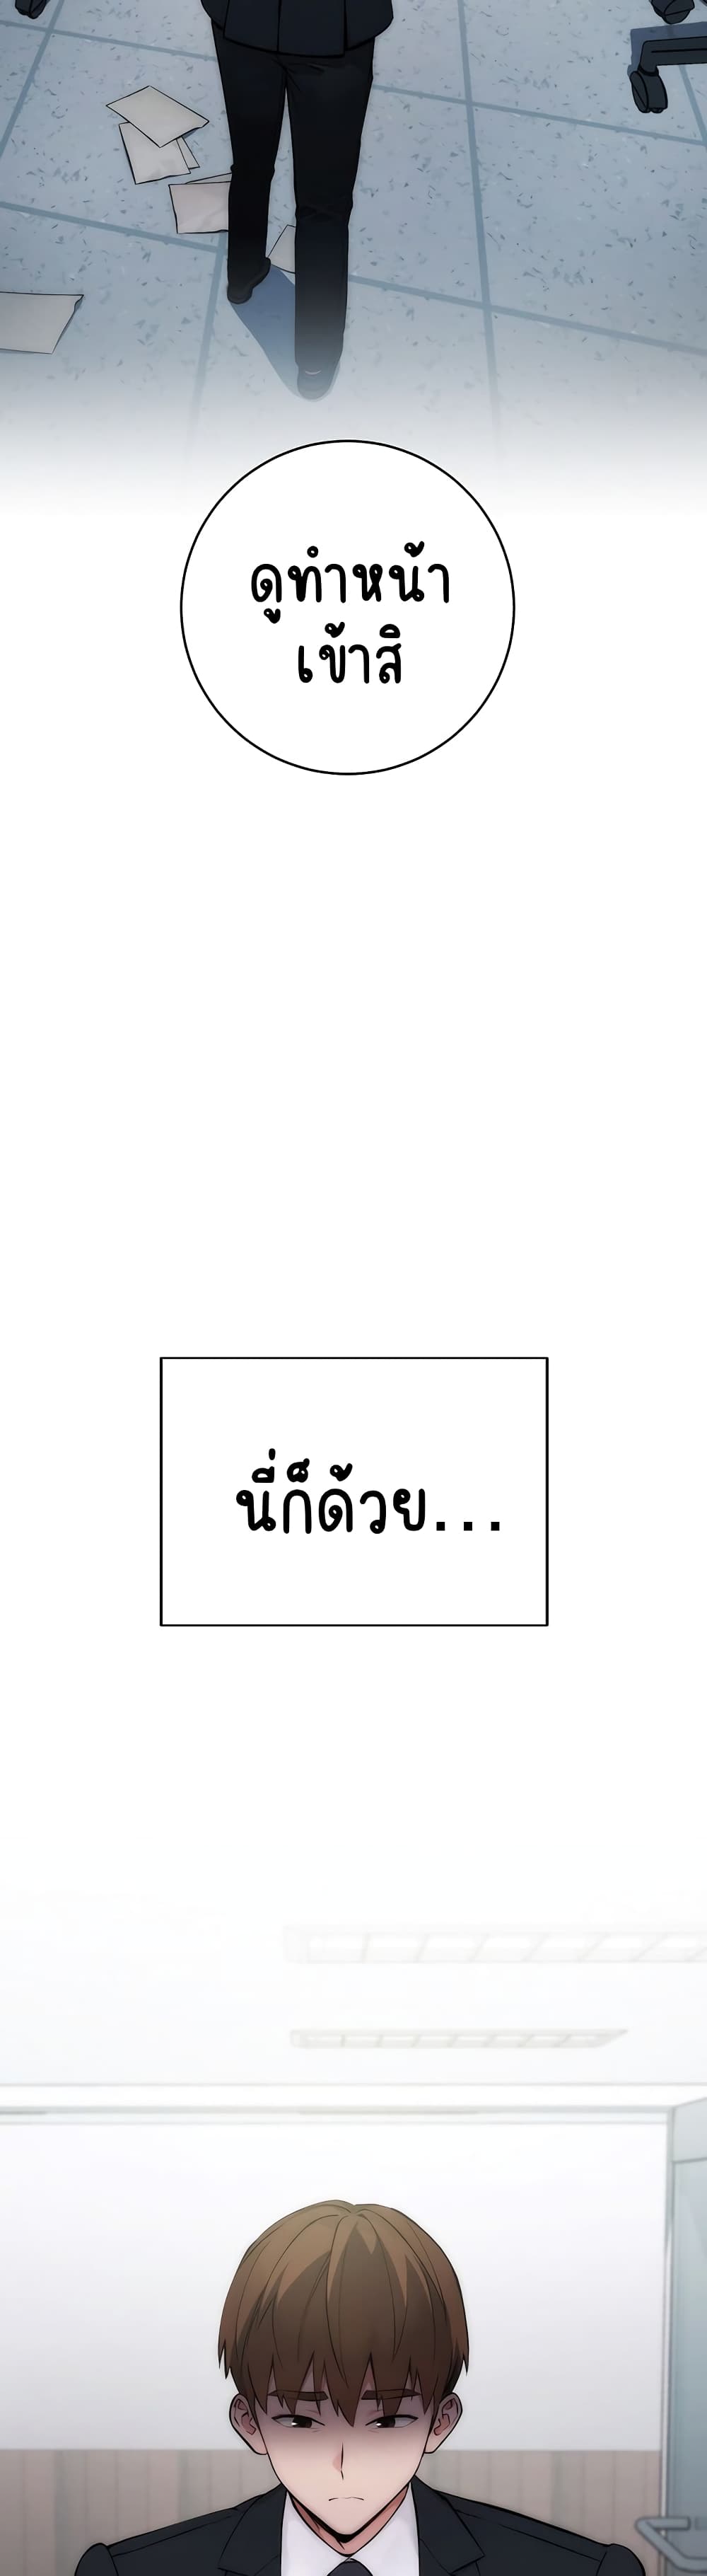 Outsider: The Invisible Man ตอนที่ 1 ภาพ 9